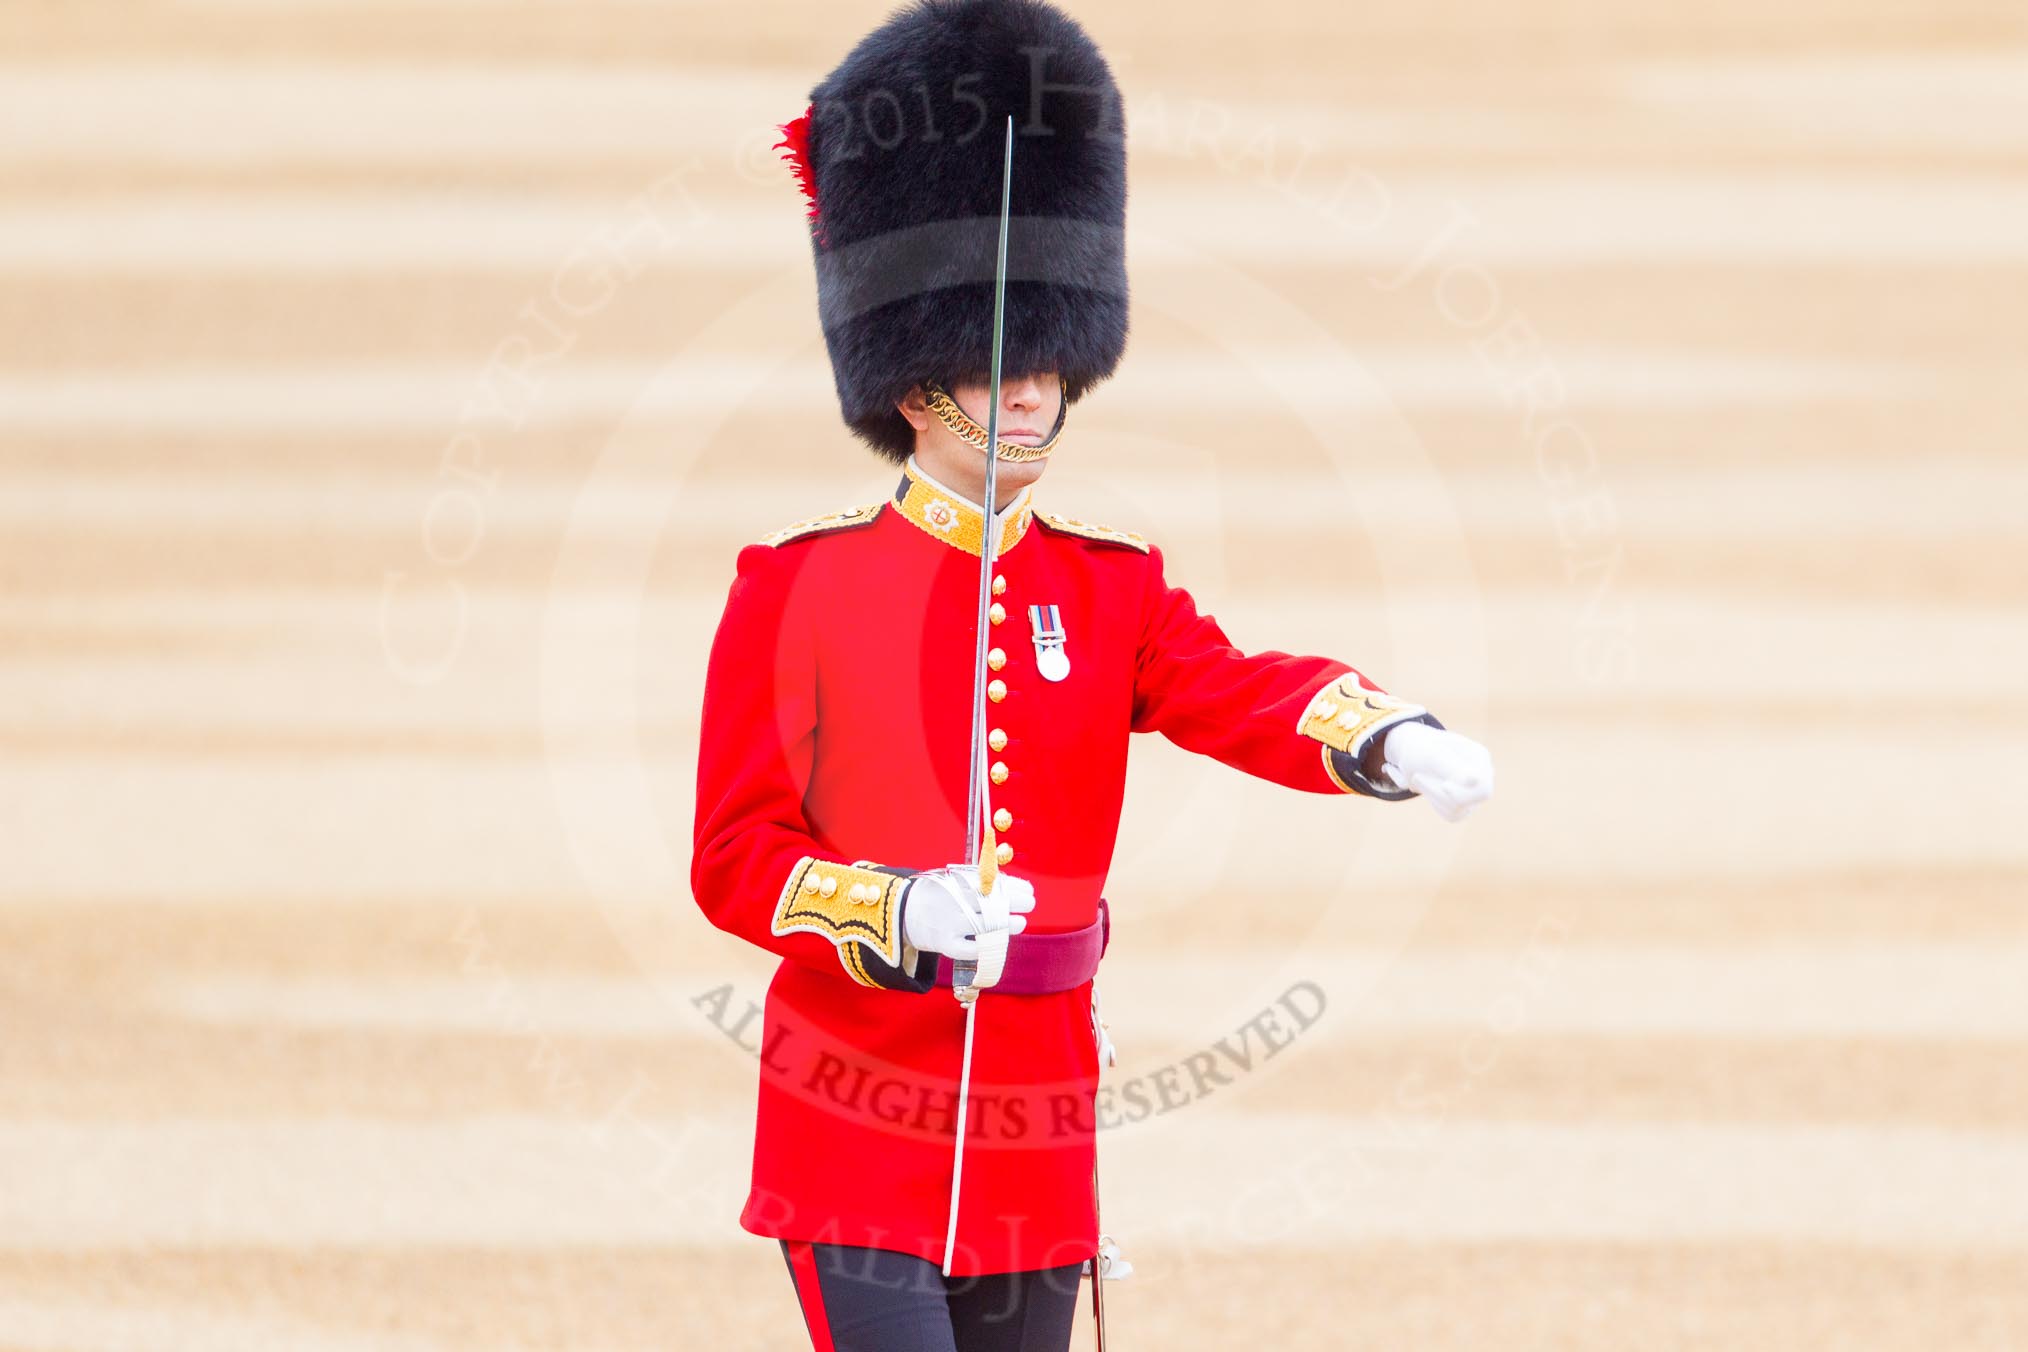 The Colonel's Review 2016.
Horse Guards Parade, Westminster,
London,

United Kingdom,
on 04 June 2016 at 10:34, image #91